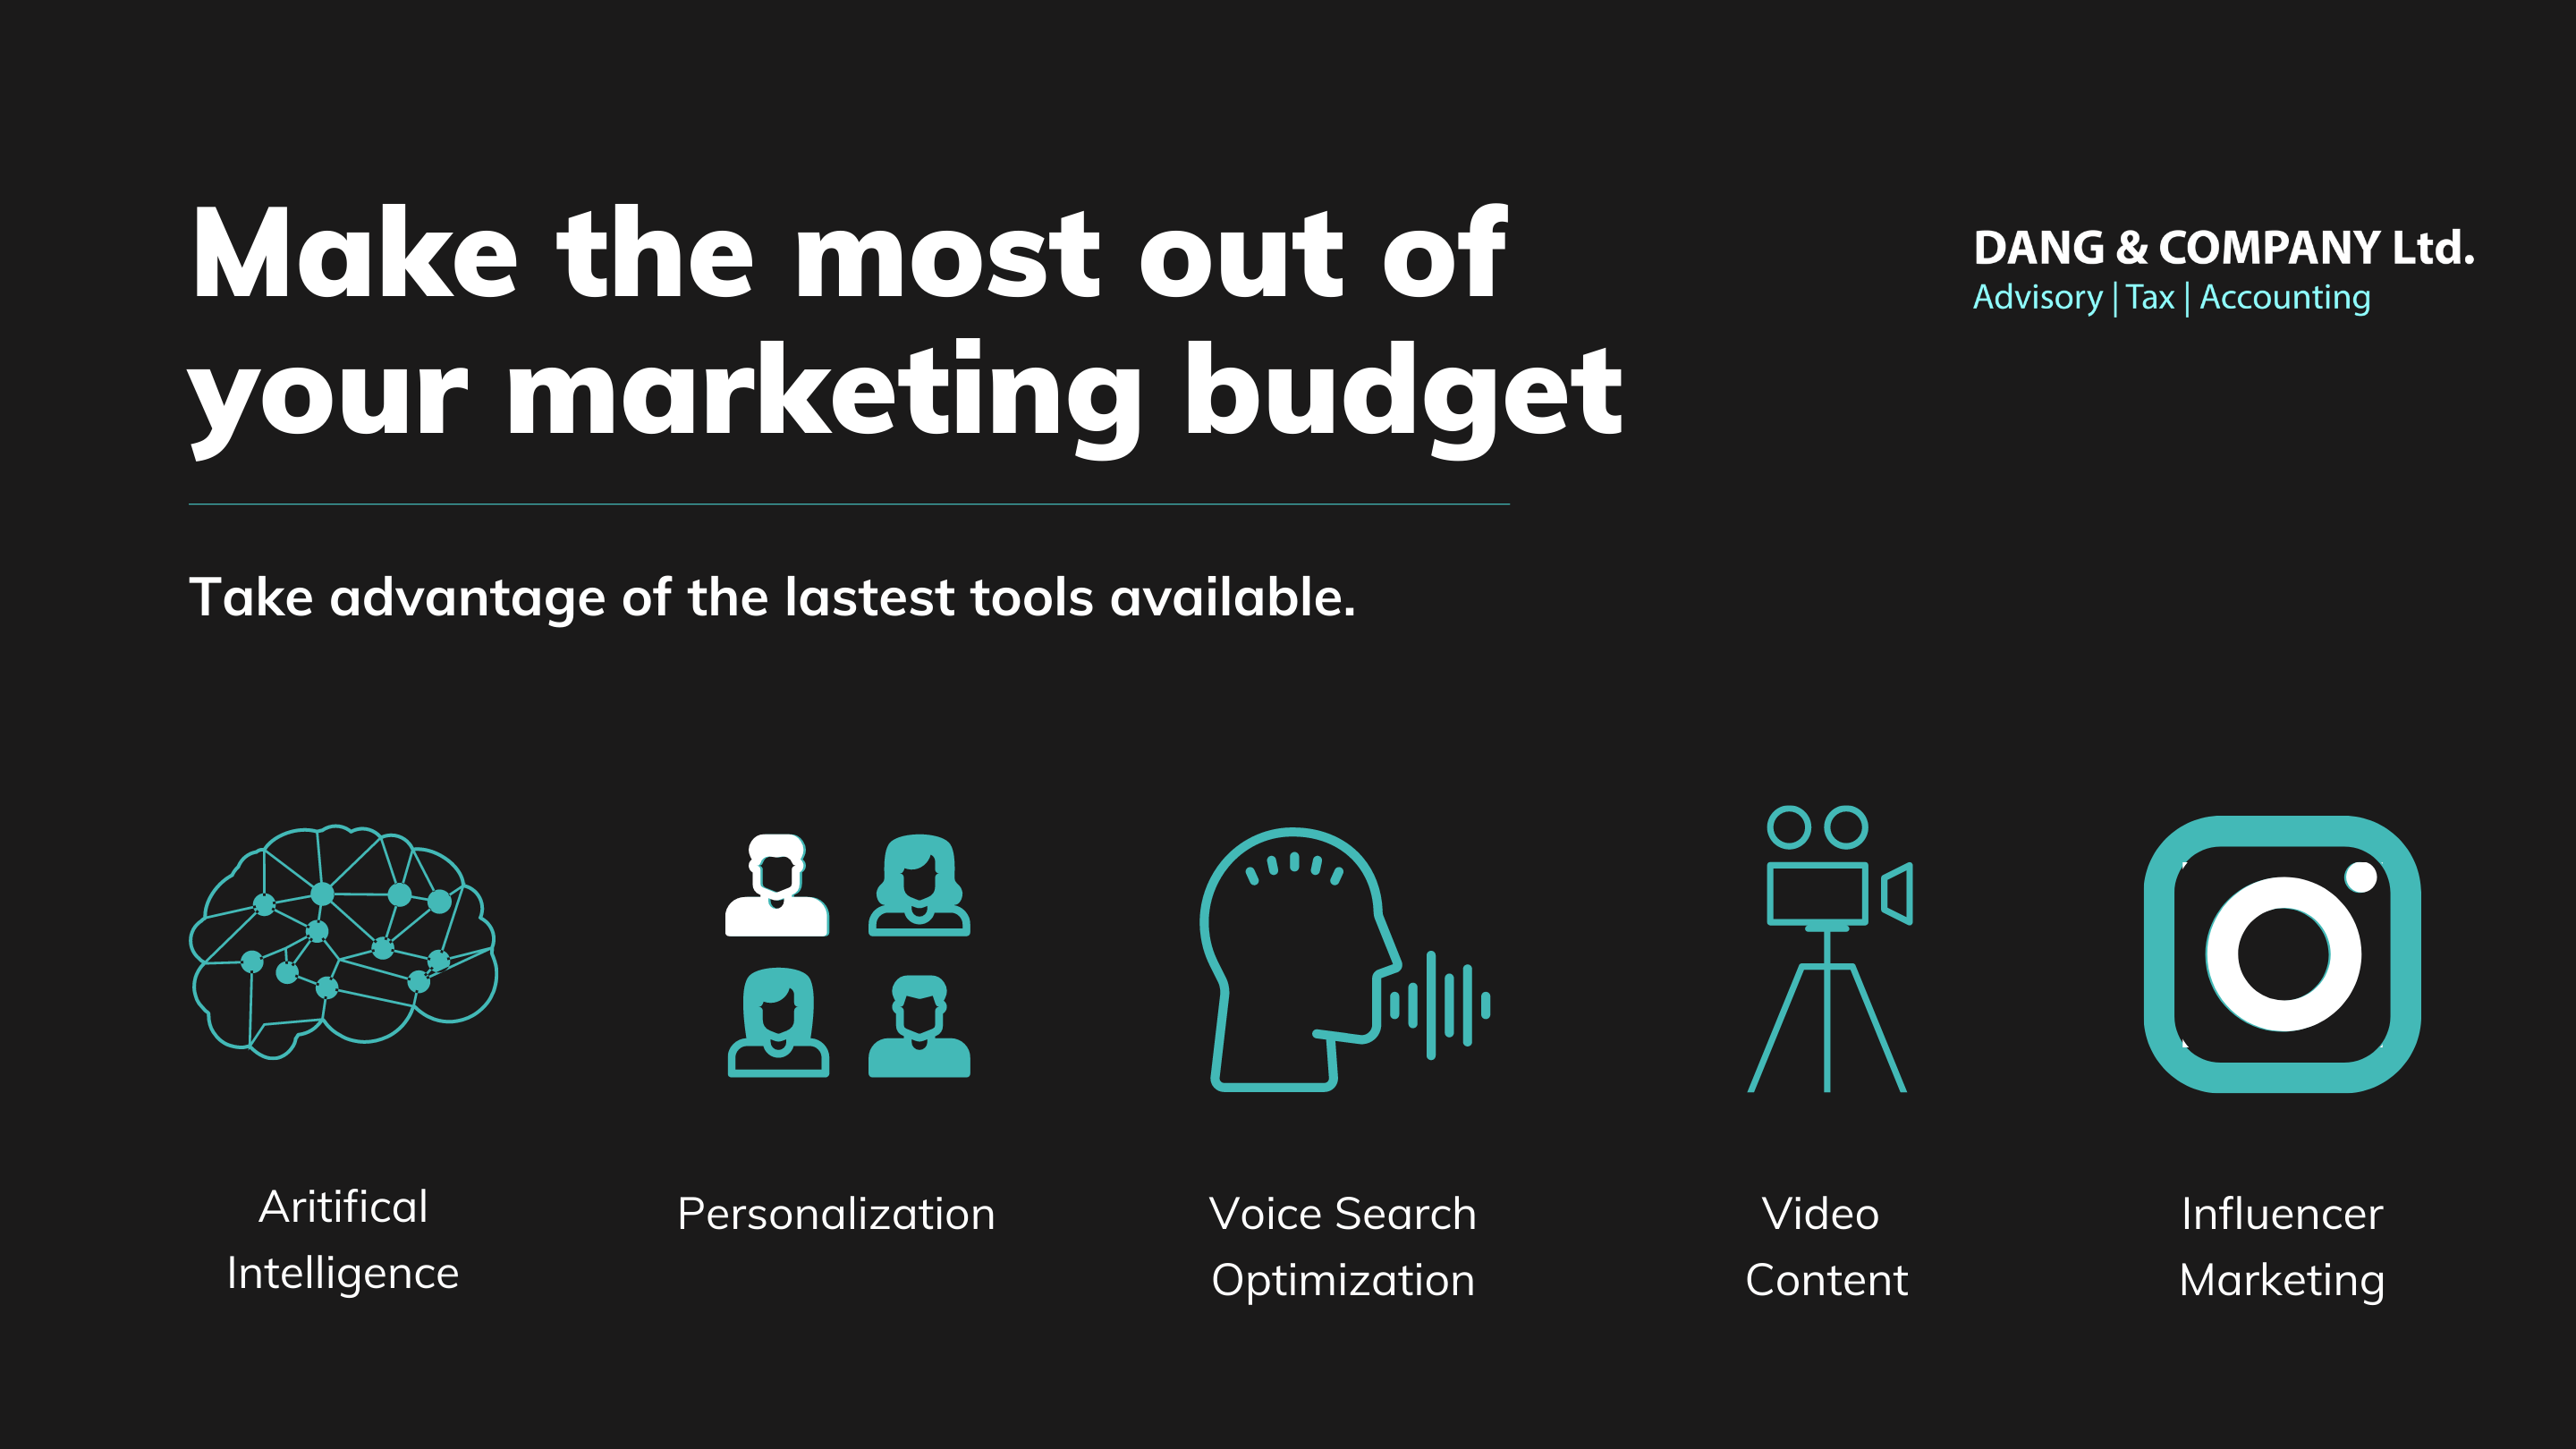 Making the most out of your marketing budget